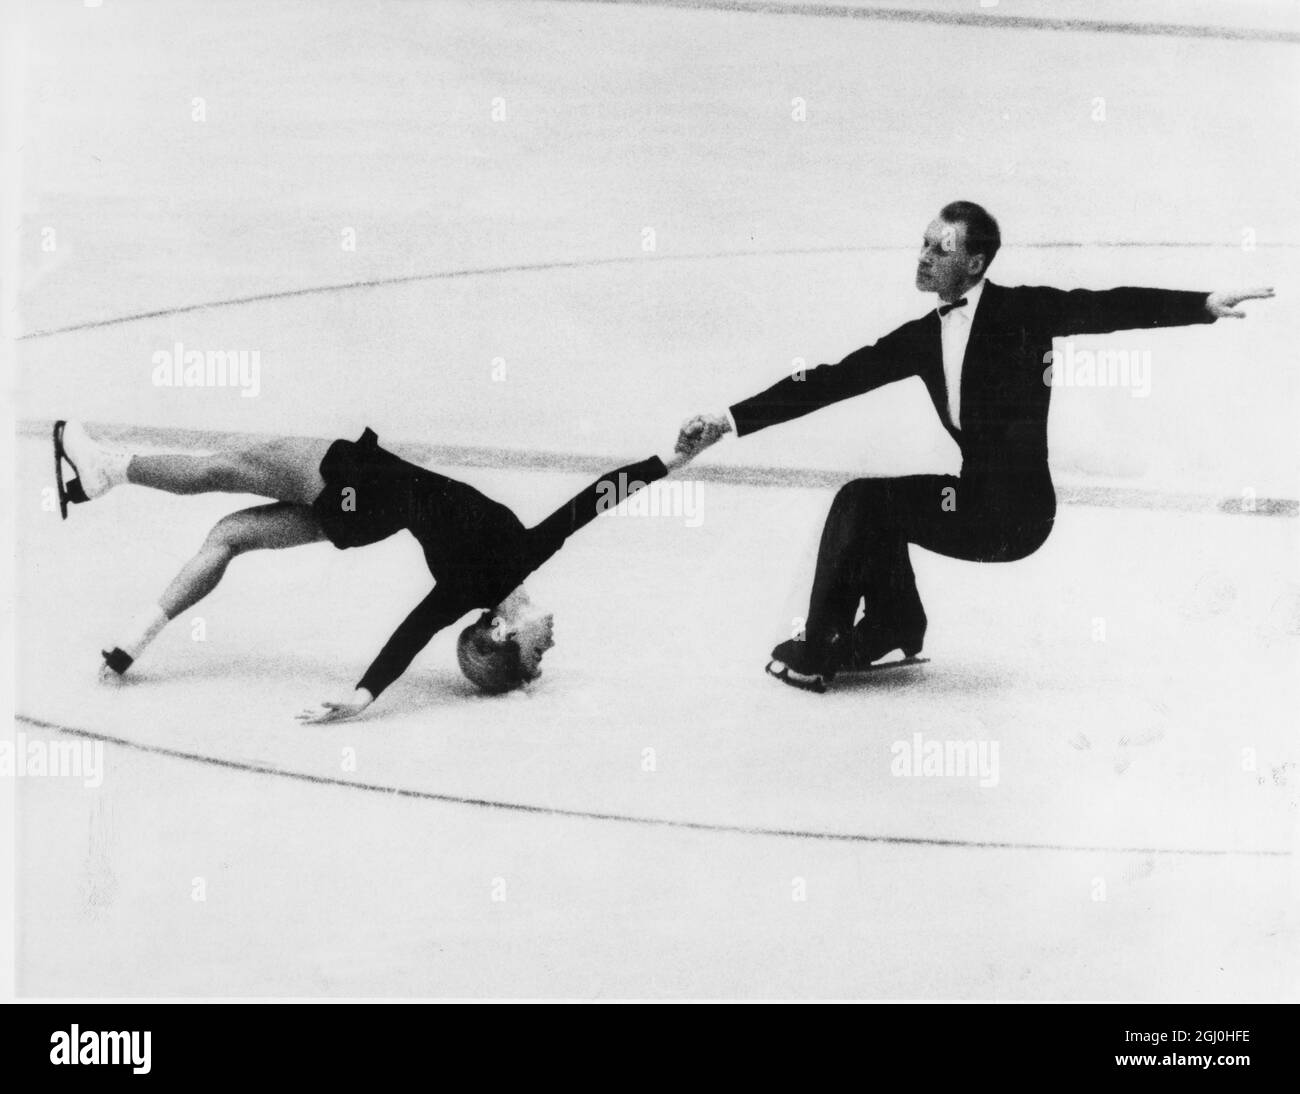 1964 Winter Olympic Games - Innsbruck, Austria Oleg Protopopov and Ludmila Belousova, the Russians were in top form when they competed in the pair skating event in the Winter Olympic Games at Innesbruck. Without any mistakes they went on to win the Gold Medal ahead of their strong opponents H. J. Baumler and Marika Milius of Germany, who came second. Photo shows Ludmila Belousova and Oleg Protopopov in action during the pair skating event when they won a gold medal - 31st January 1964. - ©TopFoto Stock Photo